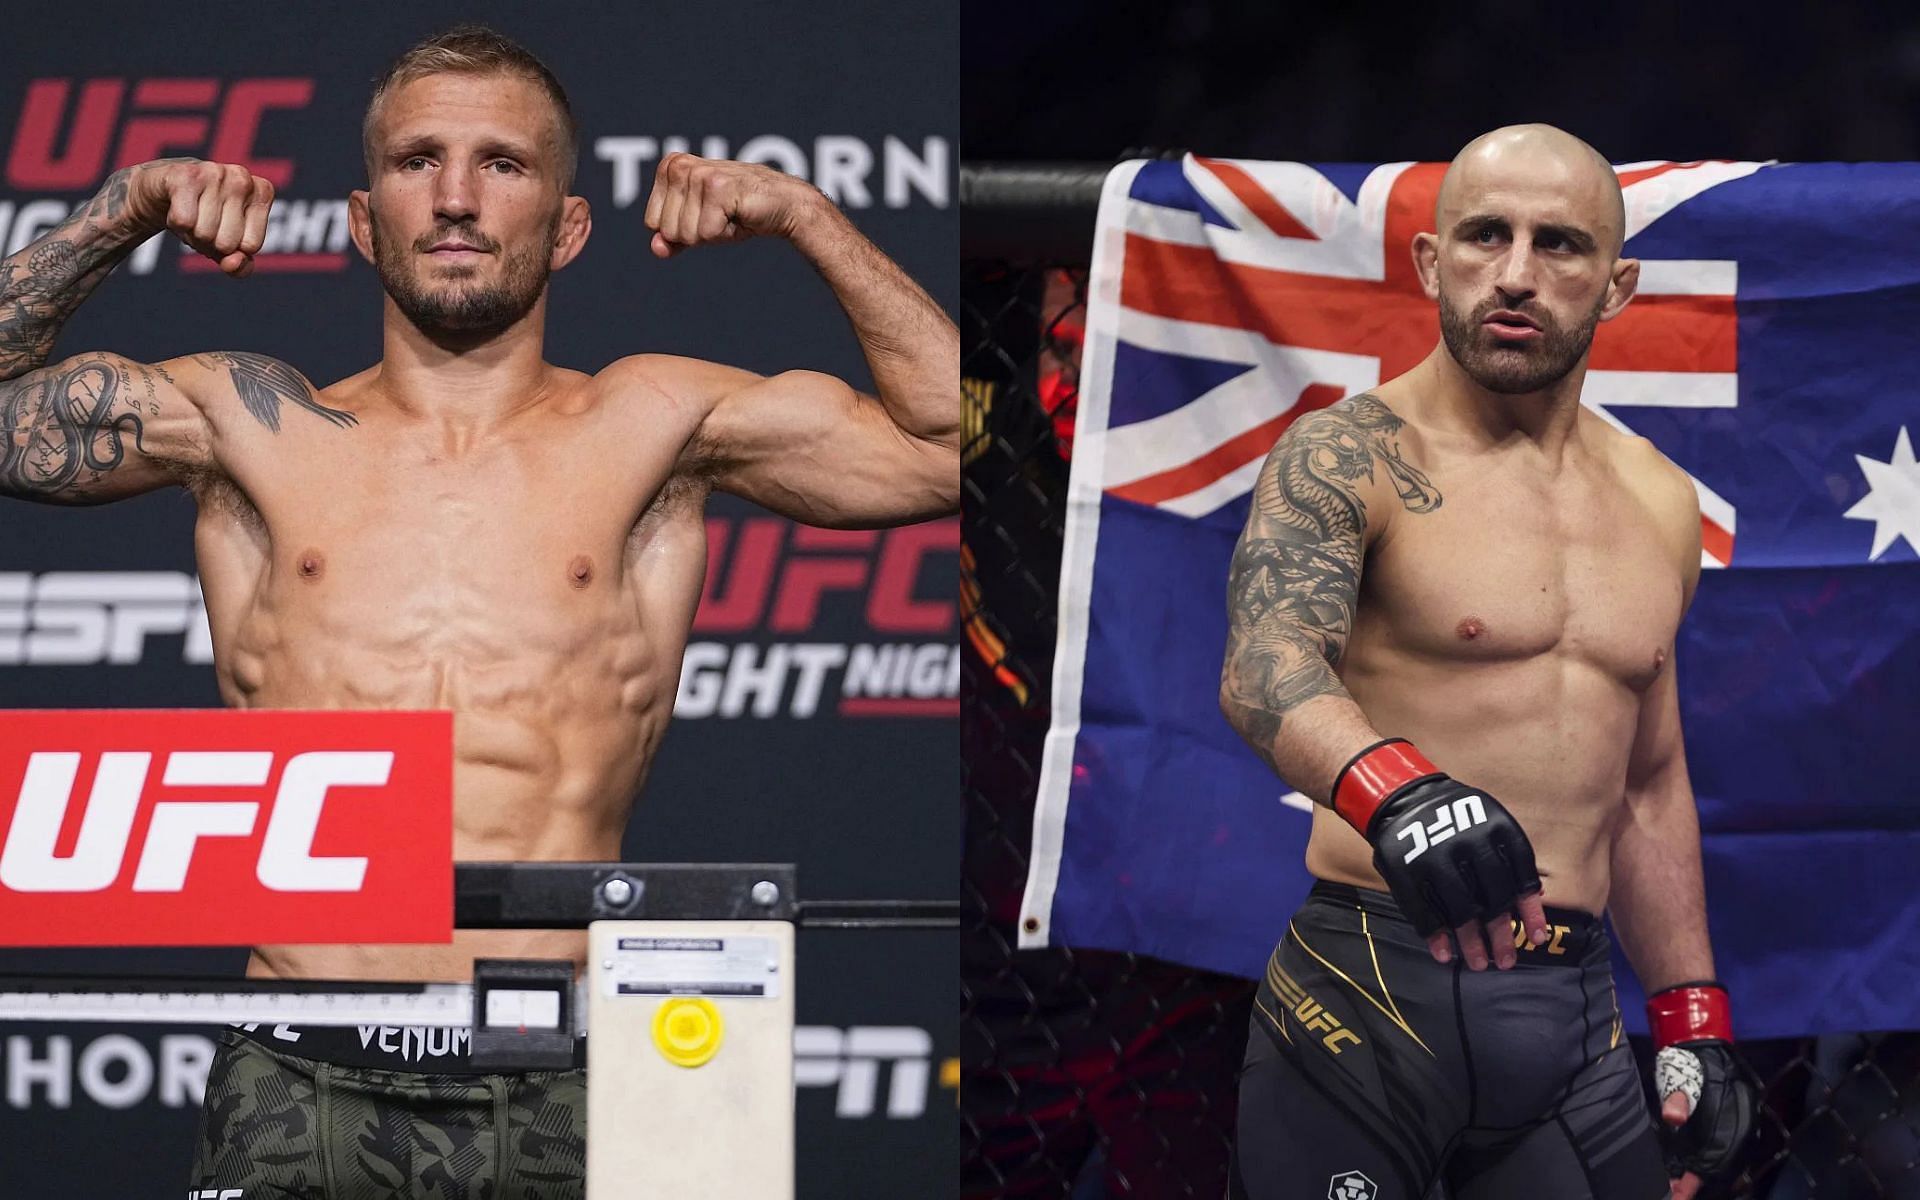 T.J. Dillashaw (Left) and Alexander Volkanovski (Right) (Images courtesy of Getty)